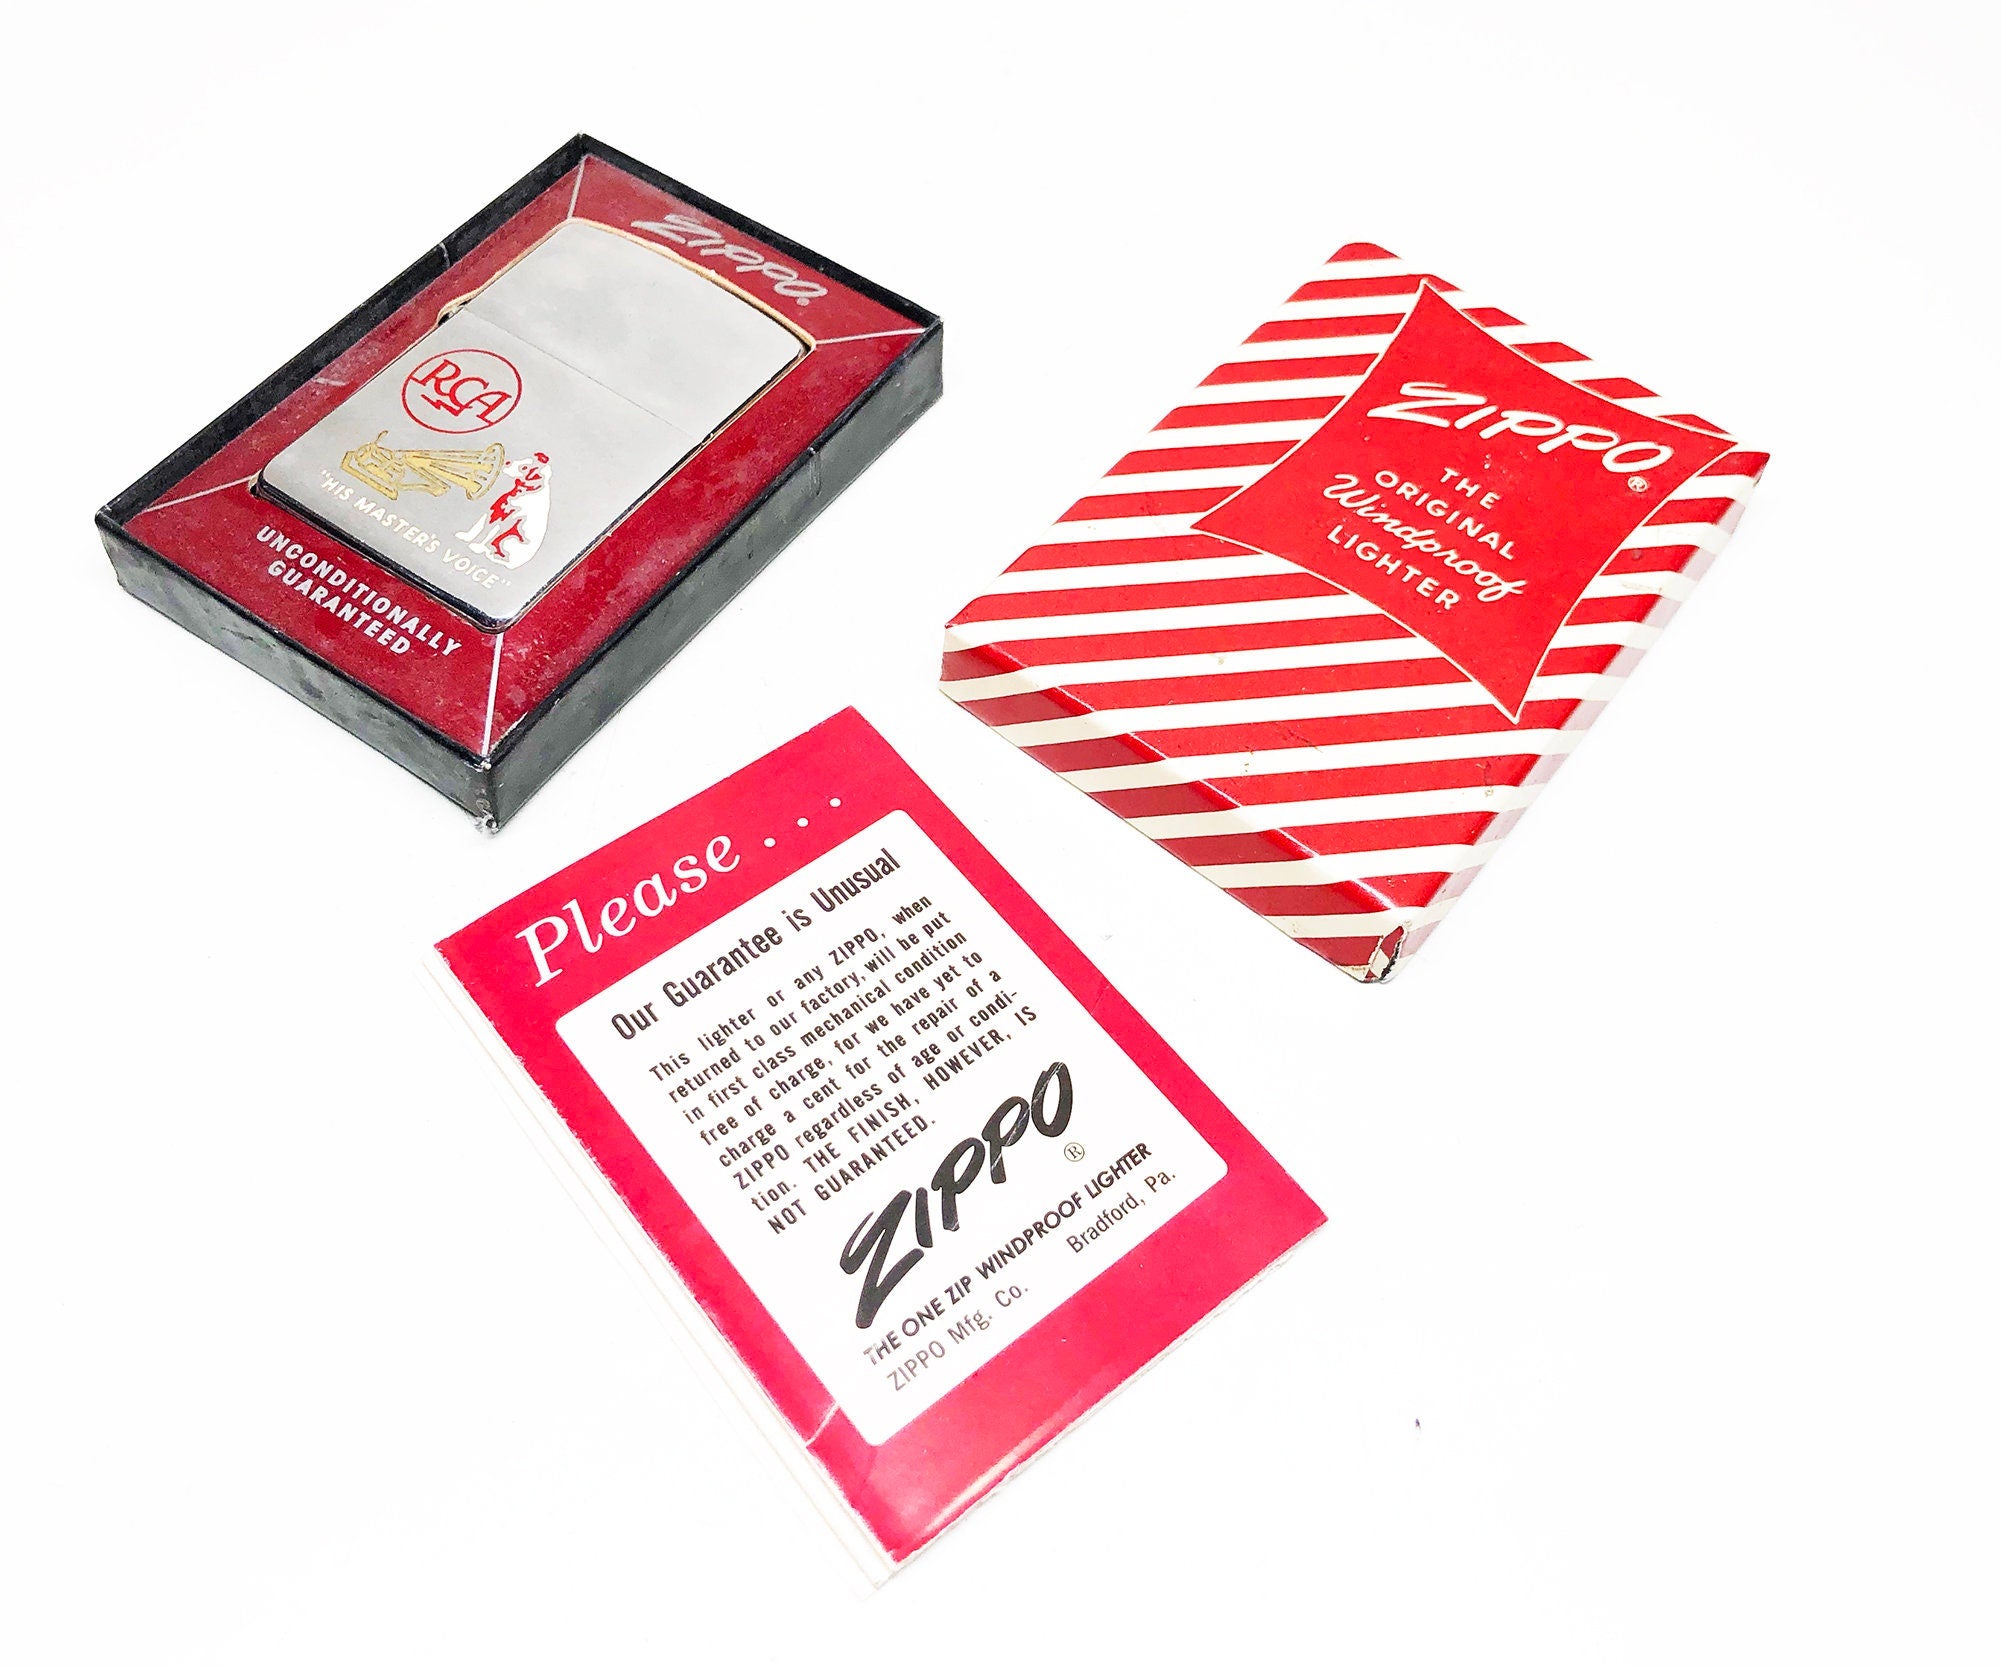 1960 RCA Nipper Zippo with Candy Stripe Box + Instructions – NORTHERN  ELECTRIC LIGHTING COMPANY